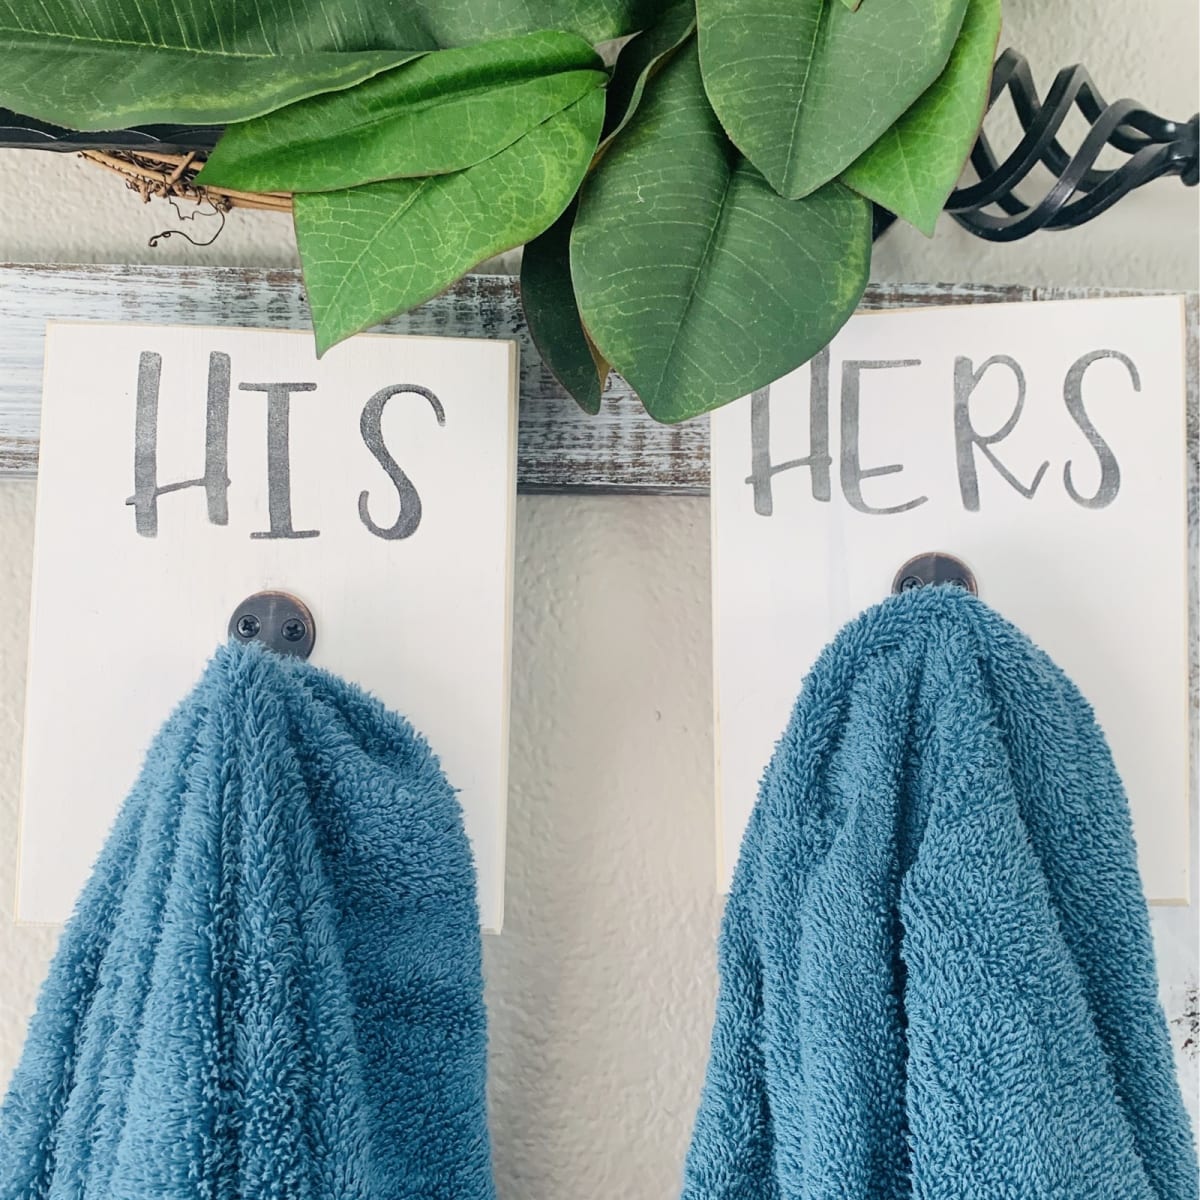 farmhouse-his-hers-towel-hangers-only-14-99-become-a-coupon-queen